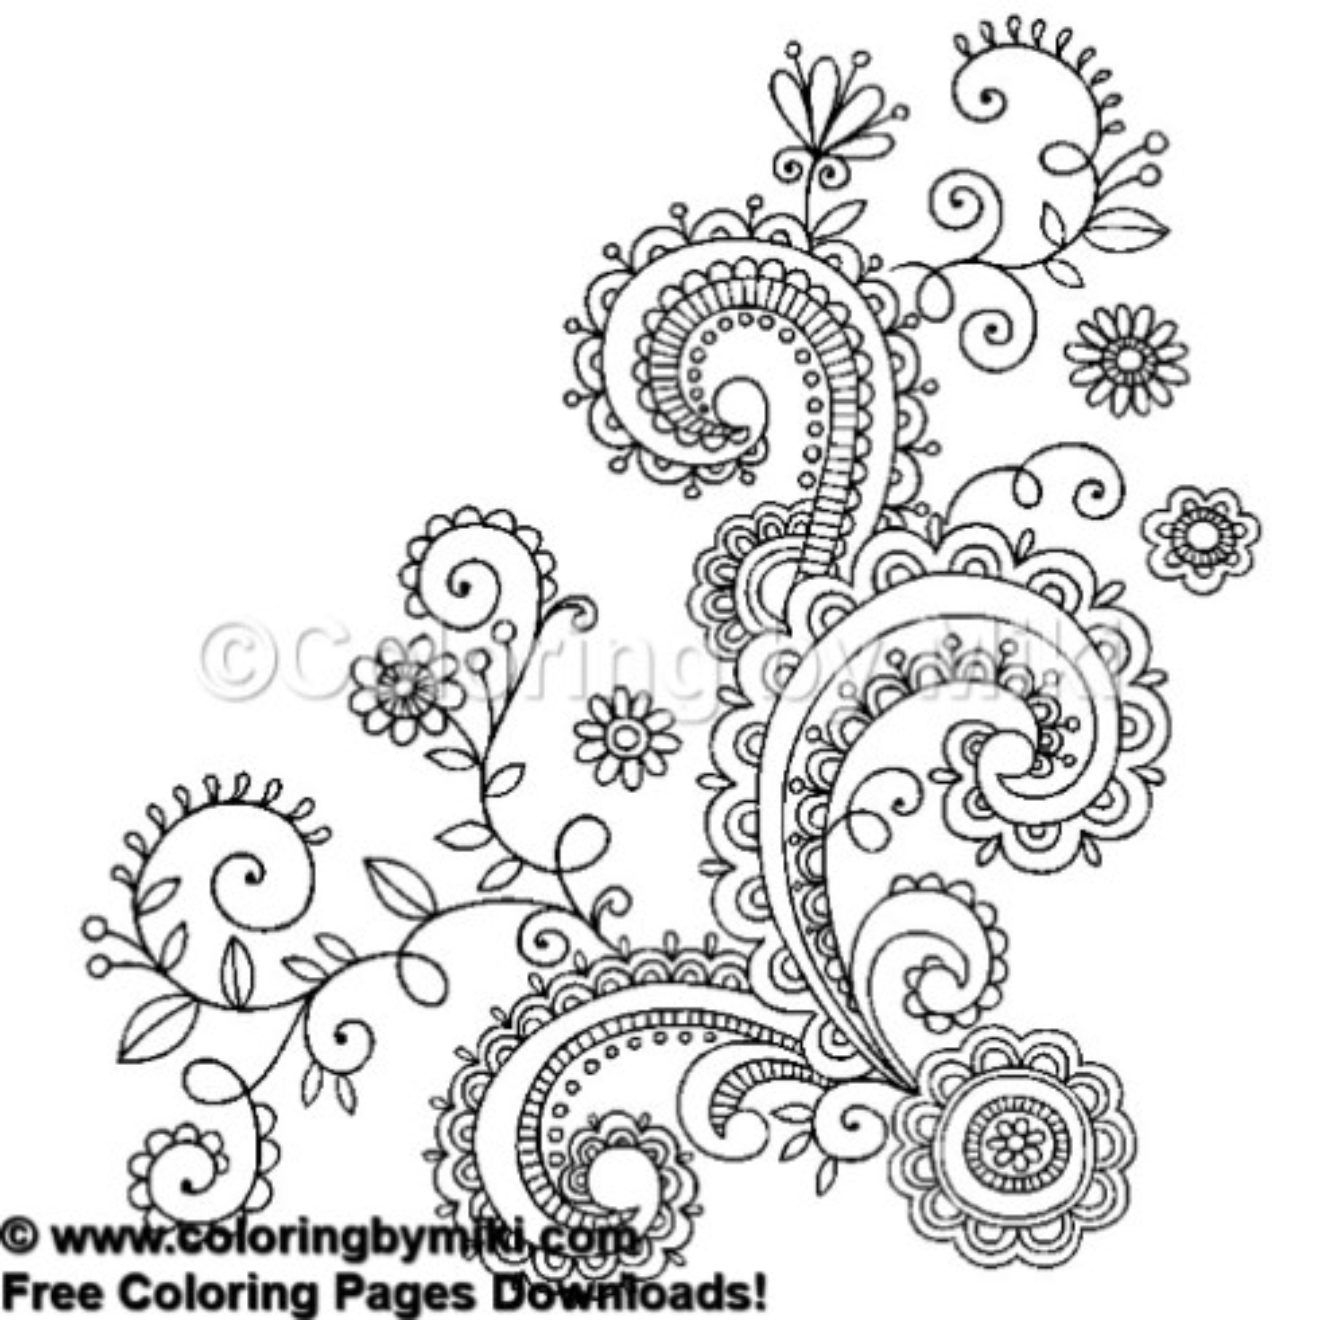 Henna Tattoo Design Coloring Page #653 | Tribal - Free Coloring - Free Printable Henna Tattoo Designs